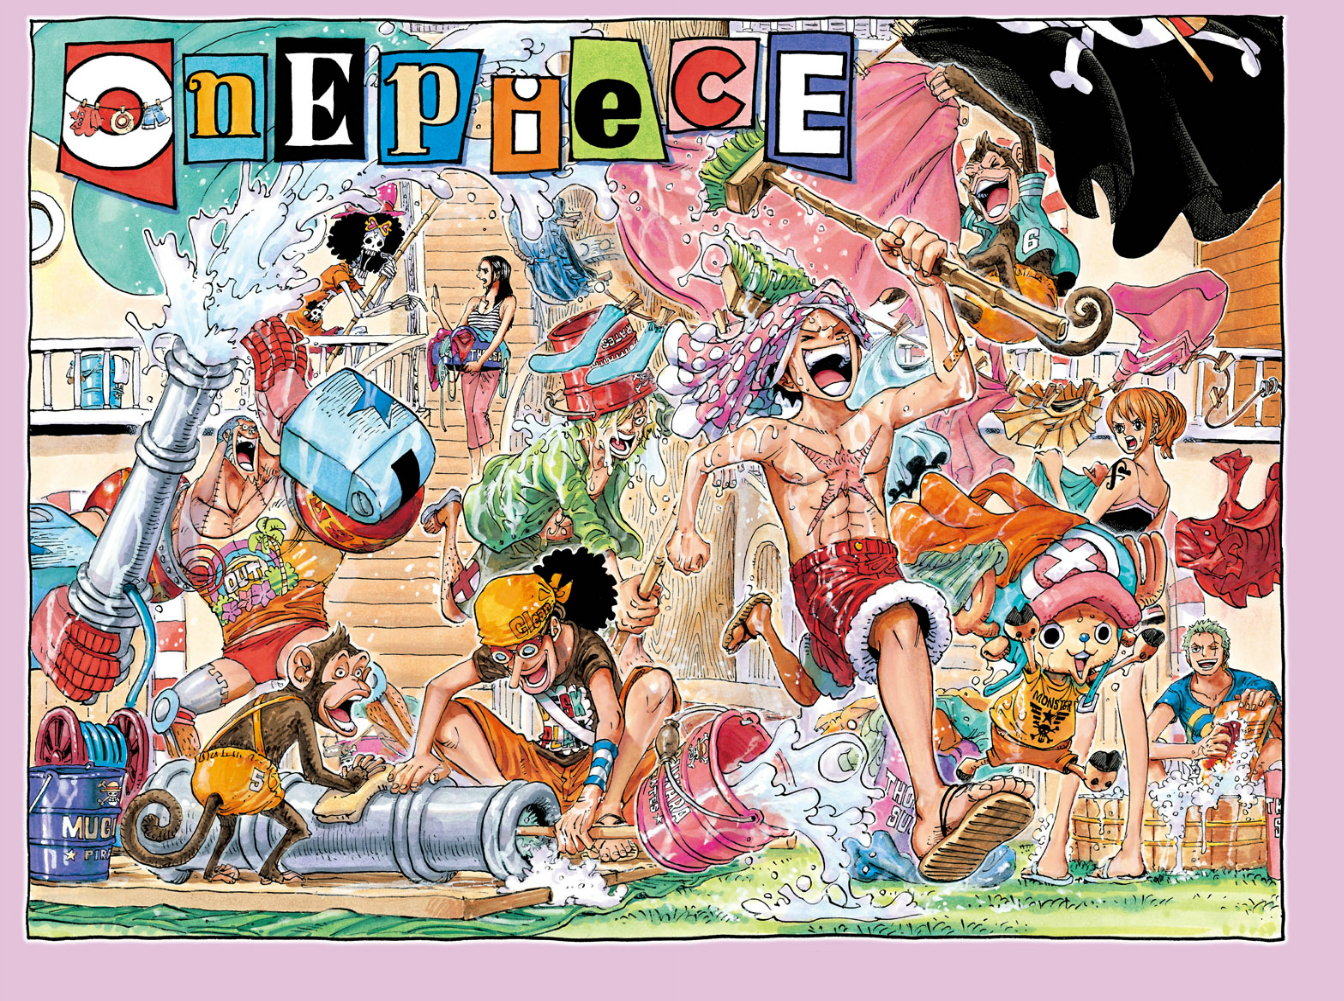 Badhri on X: Colouring of One Piece Chapter 1057 ONE PIECE ©️ Eiichiro Oda  Scans by TCB Scans  / X